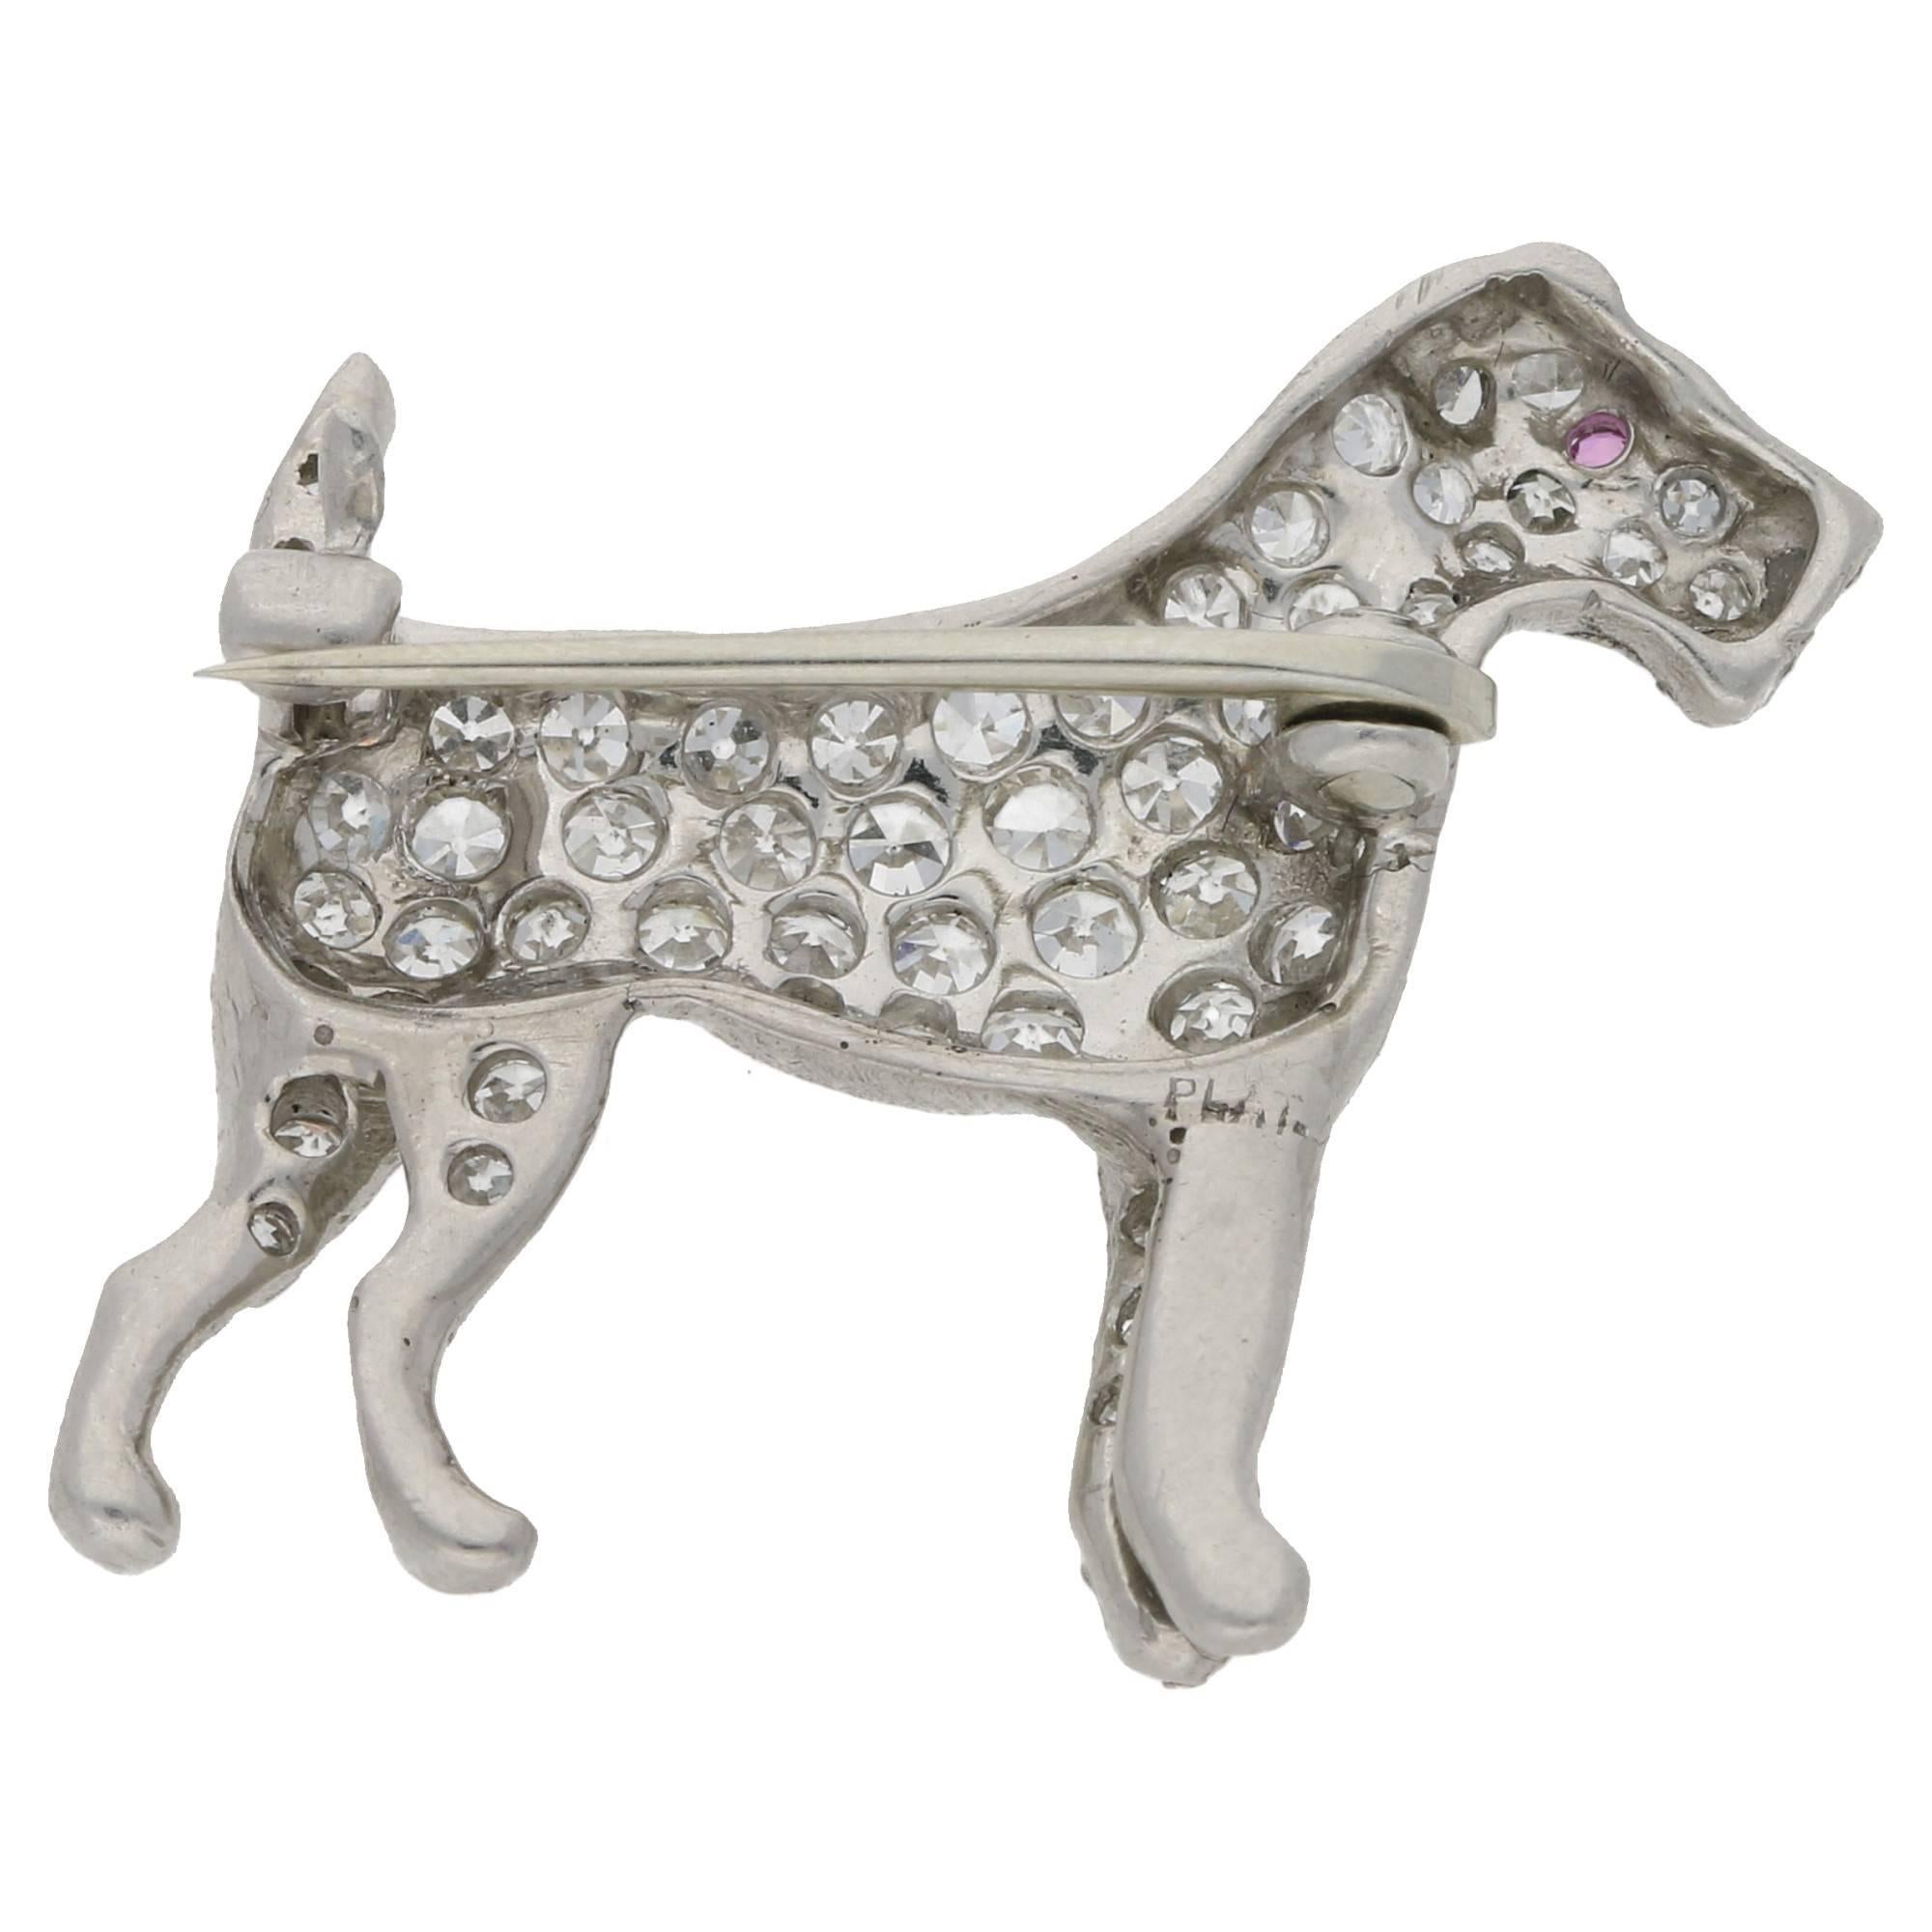 A delightful Edwardian diamond set fox terrier platinum dog brooch. With a vibrant ruby eye set amidst a pave of eight-cut diamonds, with a hidden bar brooch fitting. Estimated total diamond weight: 0.66cts. Assessed diamond colour: H. Assessed